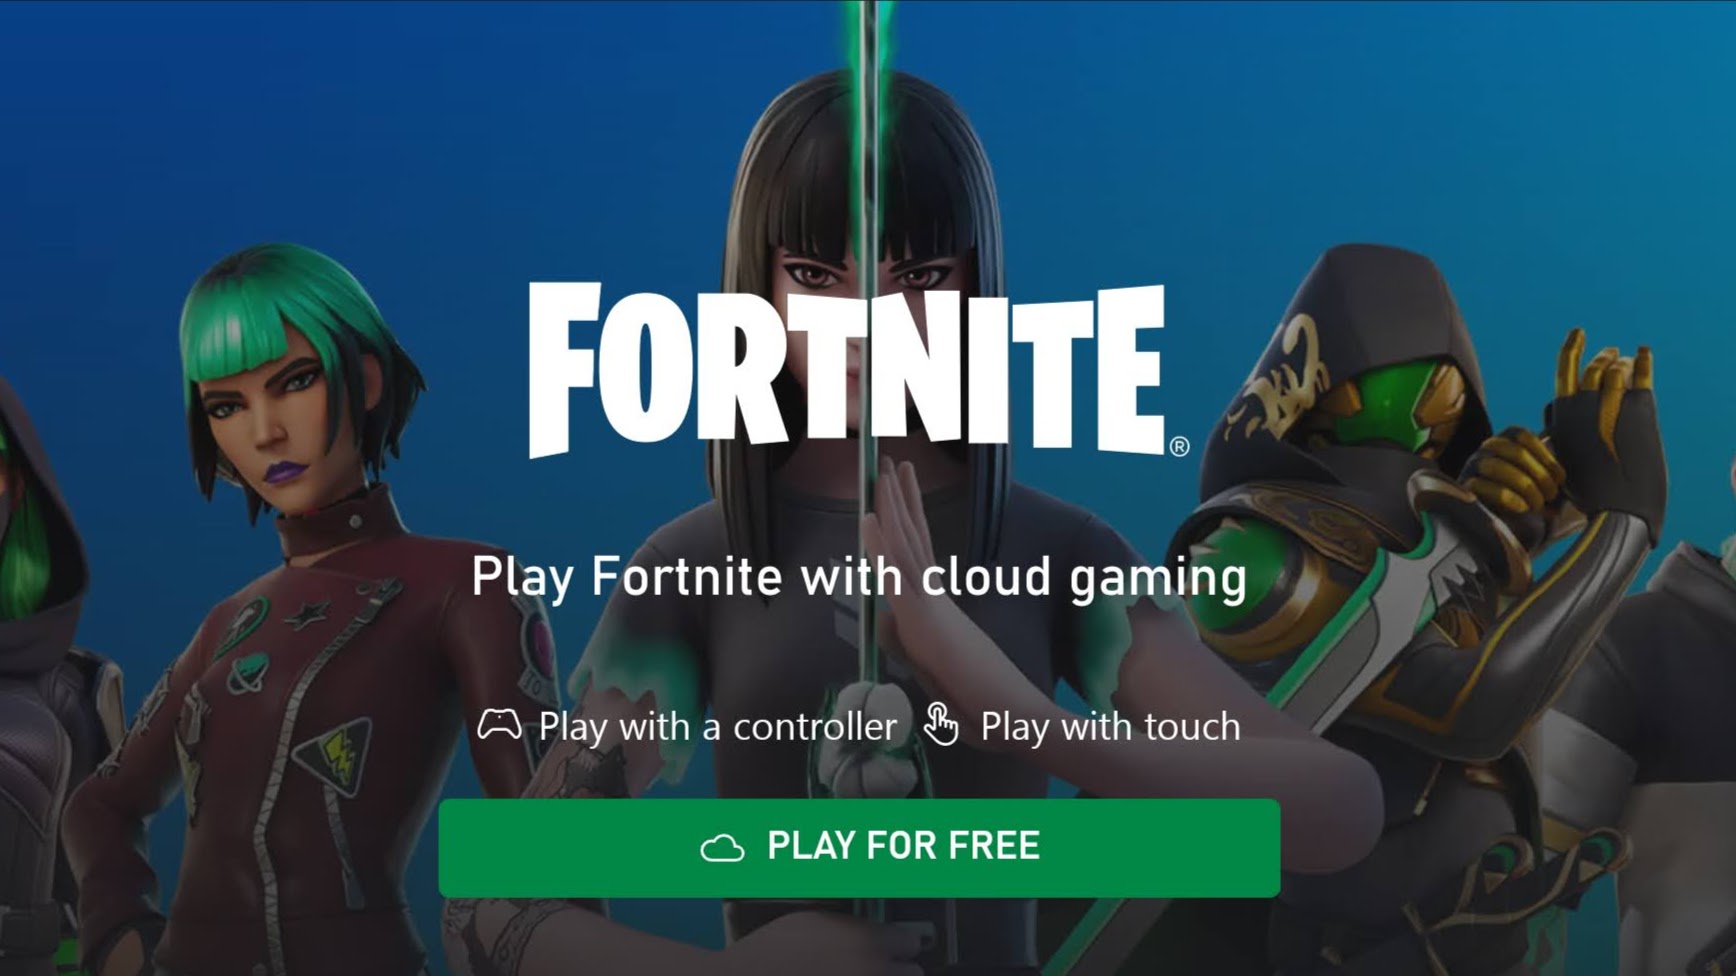 Screenshot of a Fortnite screen with a button below indicating it 